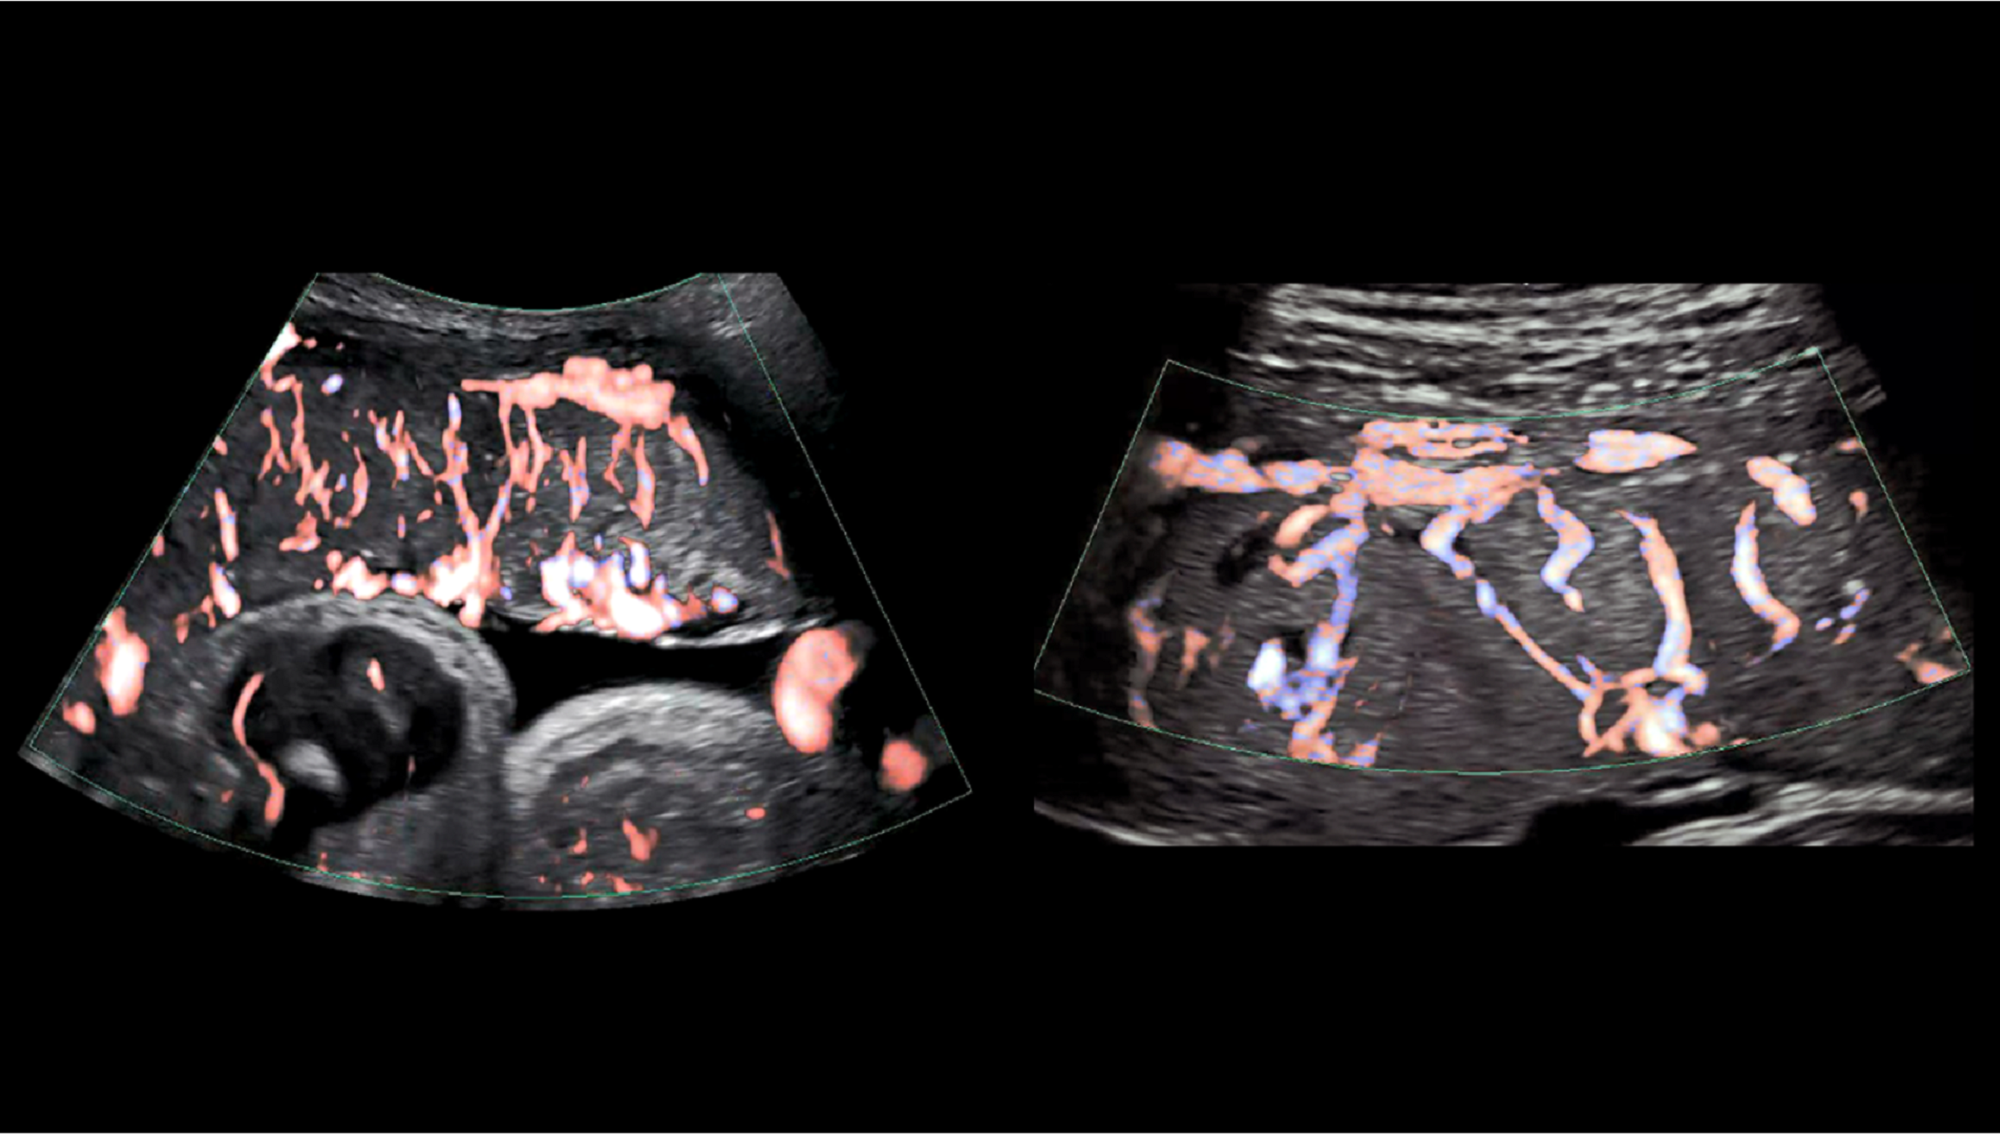 Two ultrasounds of fetal and maternal placental tissues